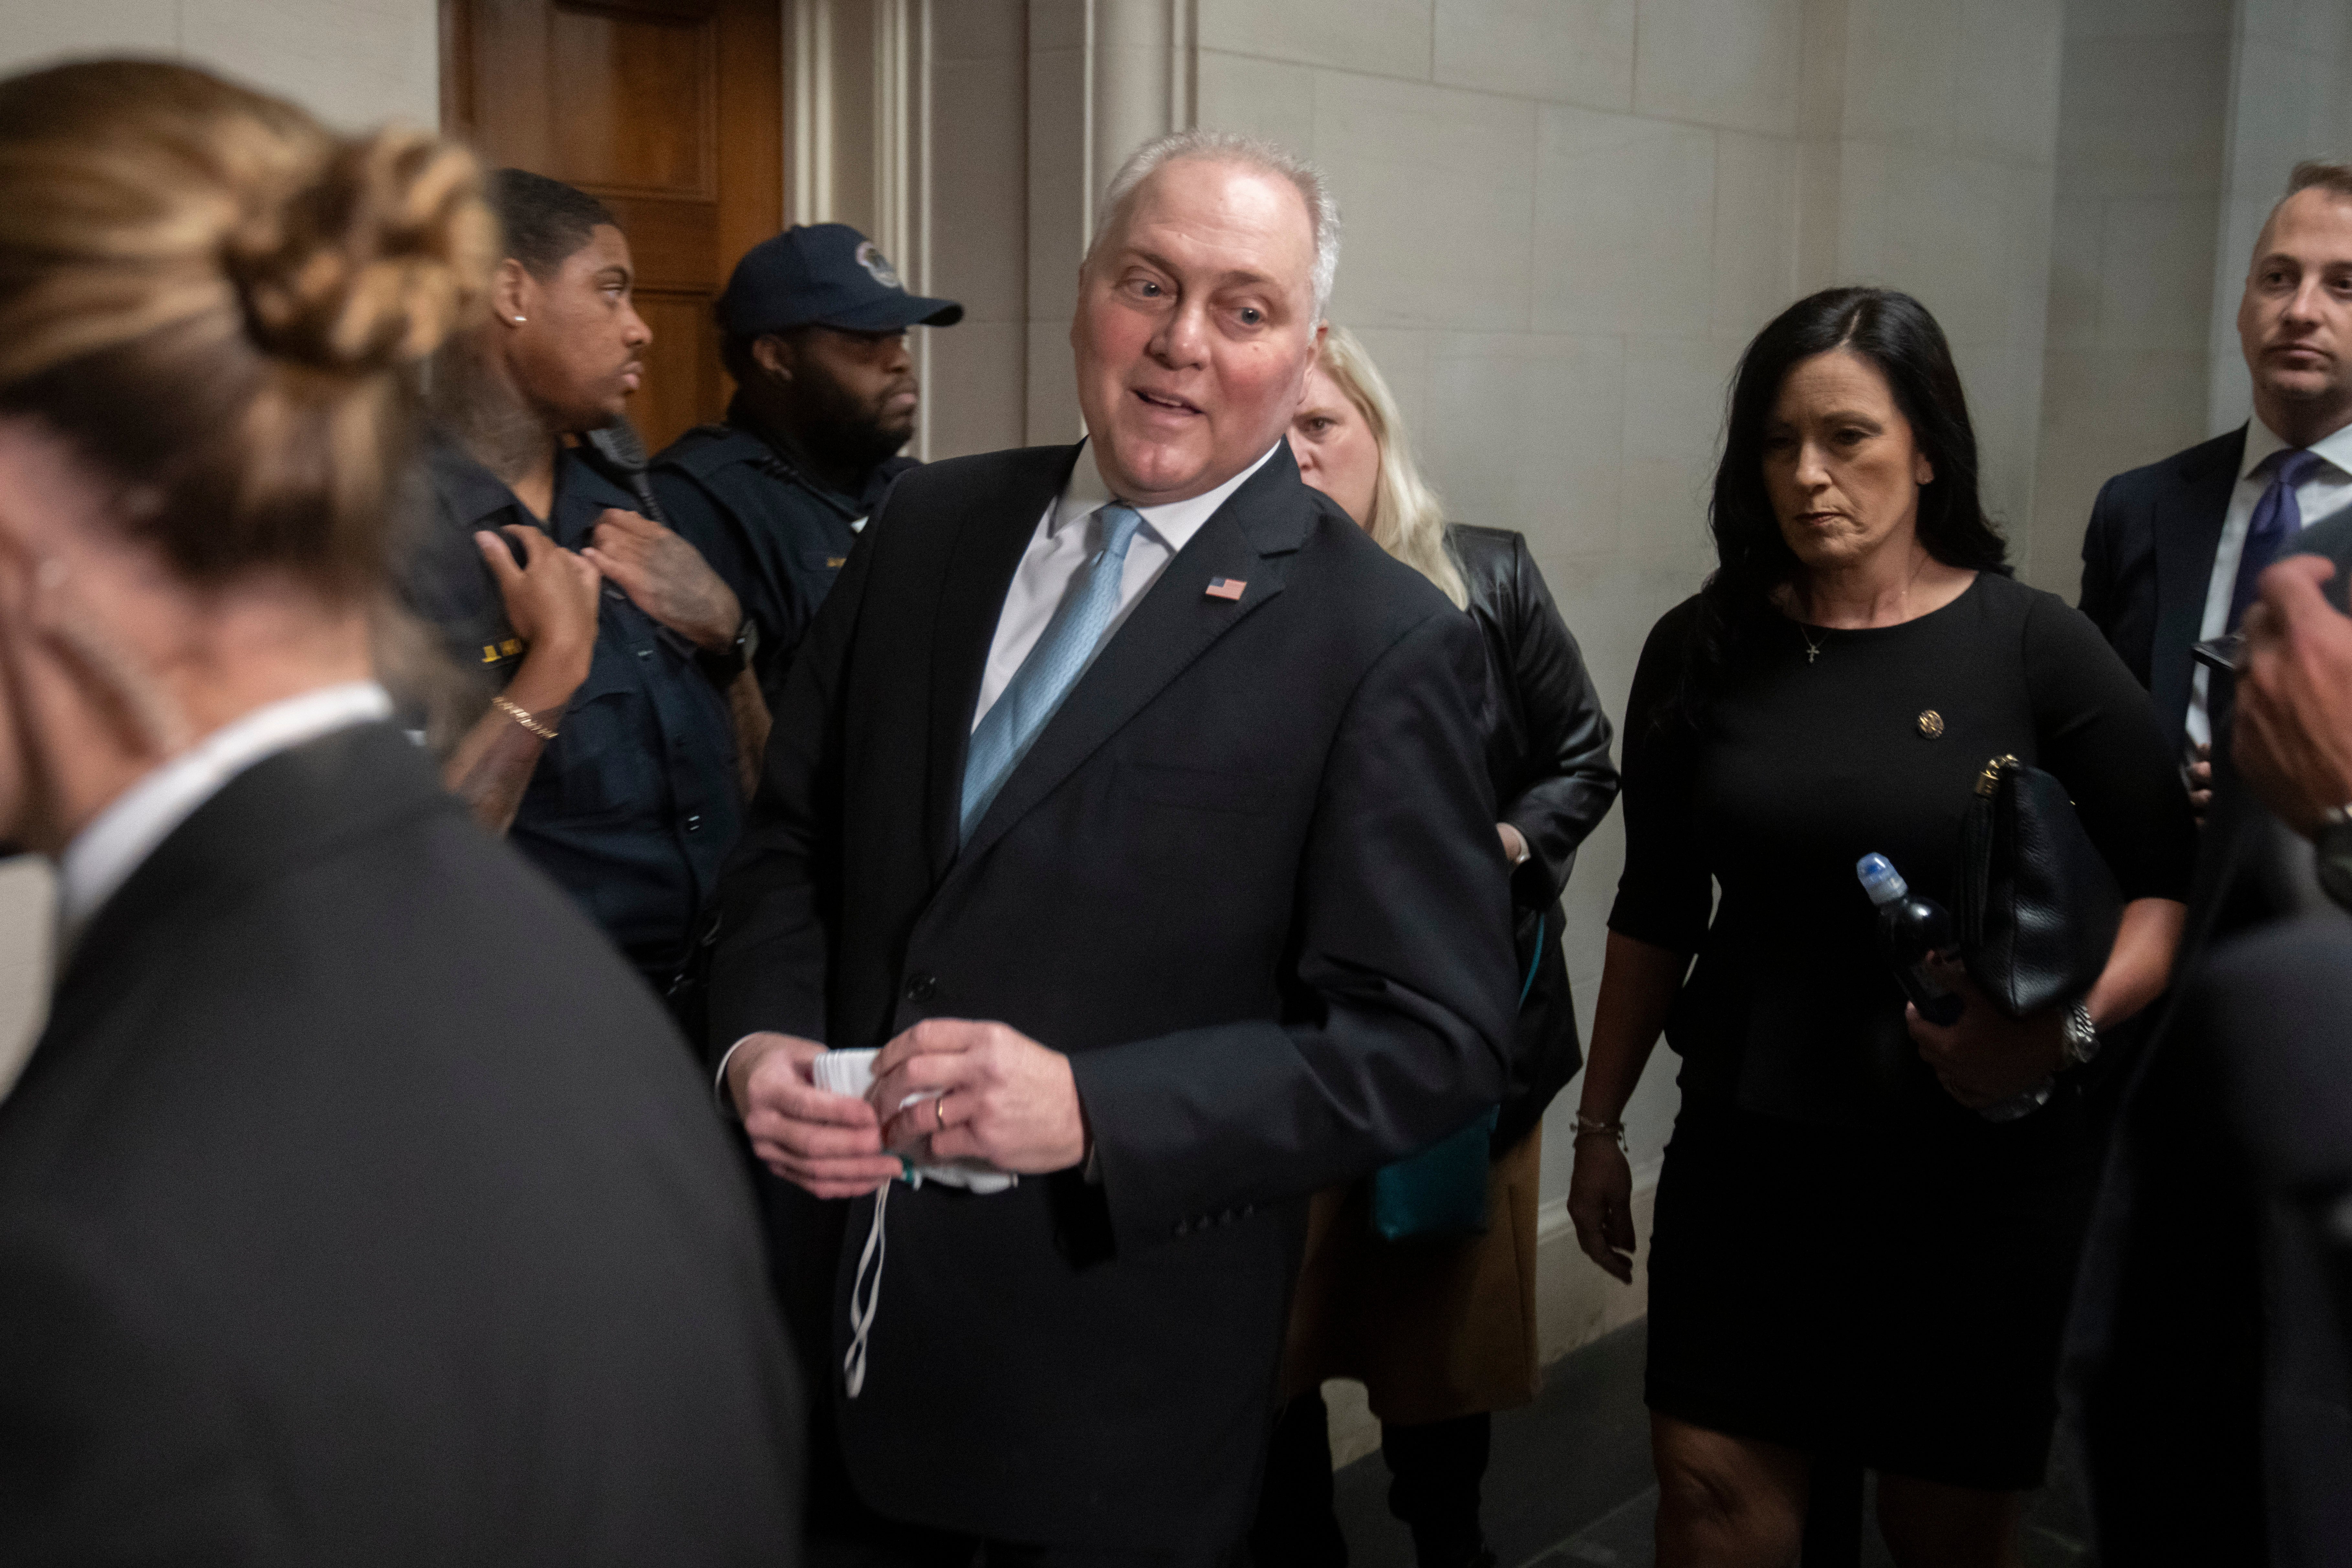 House Majority Leader Steve Scalise of Louisiana speaks to reporters as he arrives for a meeting of House Republicans to vote on candidates for Speaker of the House